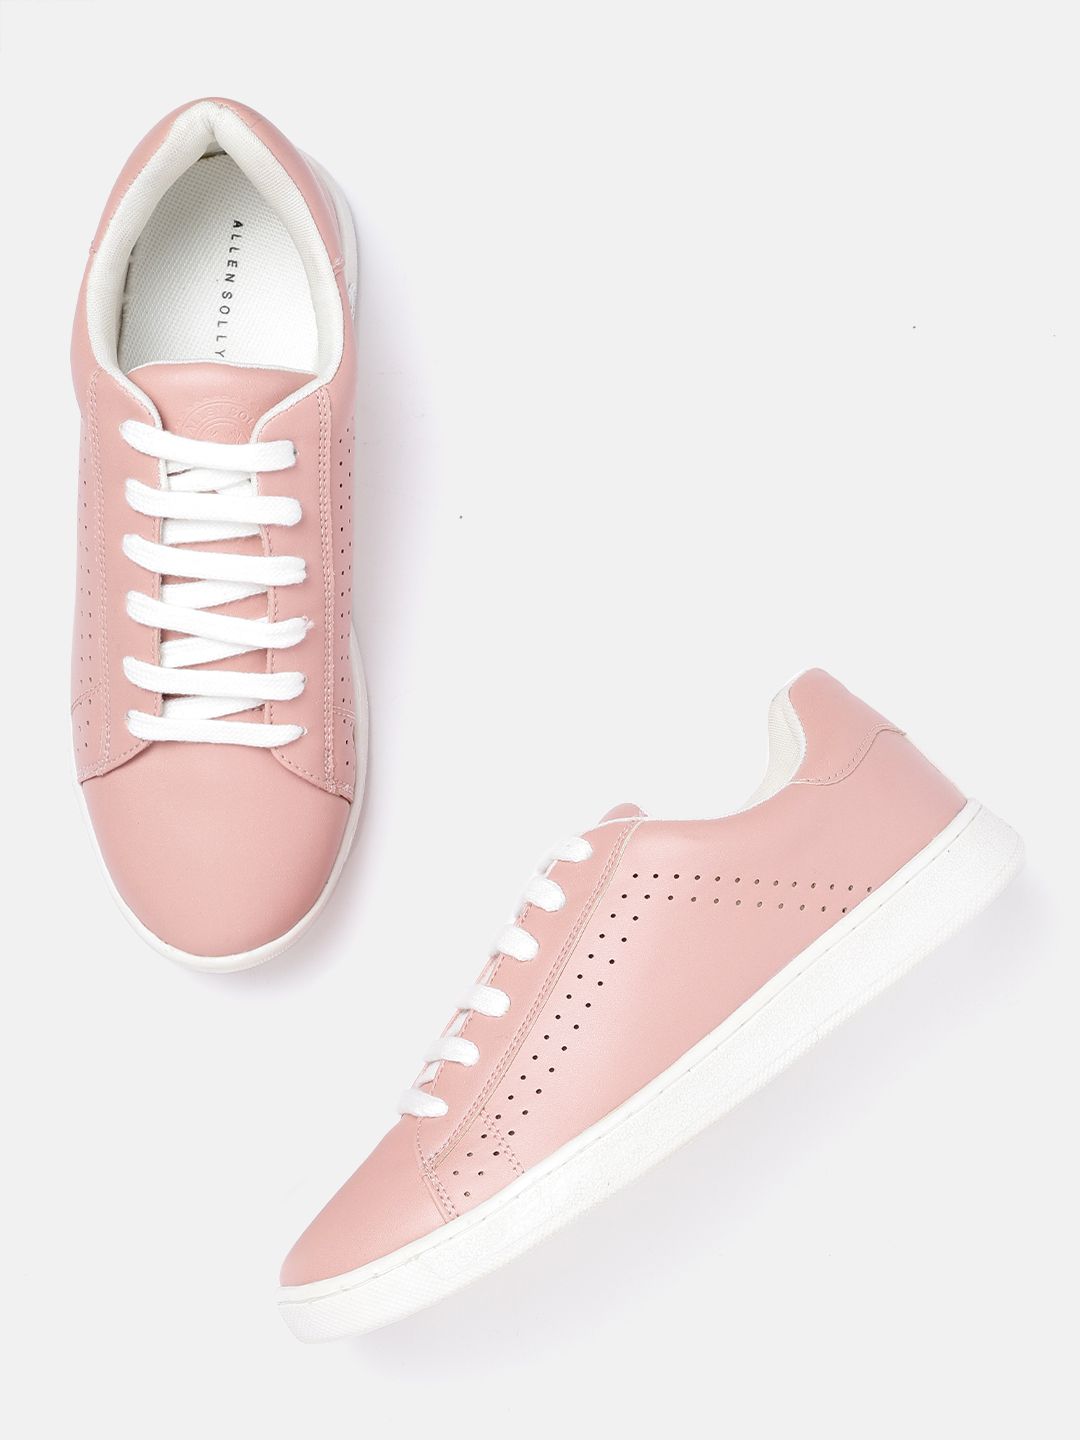 Allen Solly Women Peach-Coloured Solid Sneakers with Perforated Detail Price in India